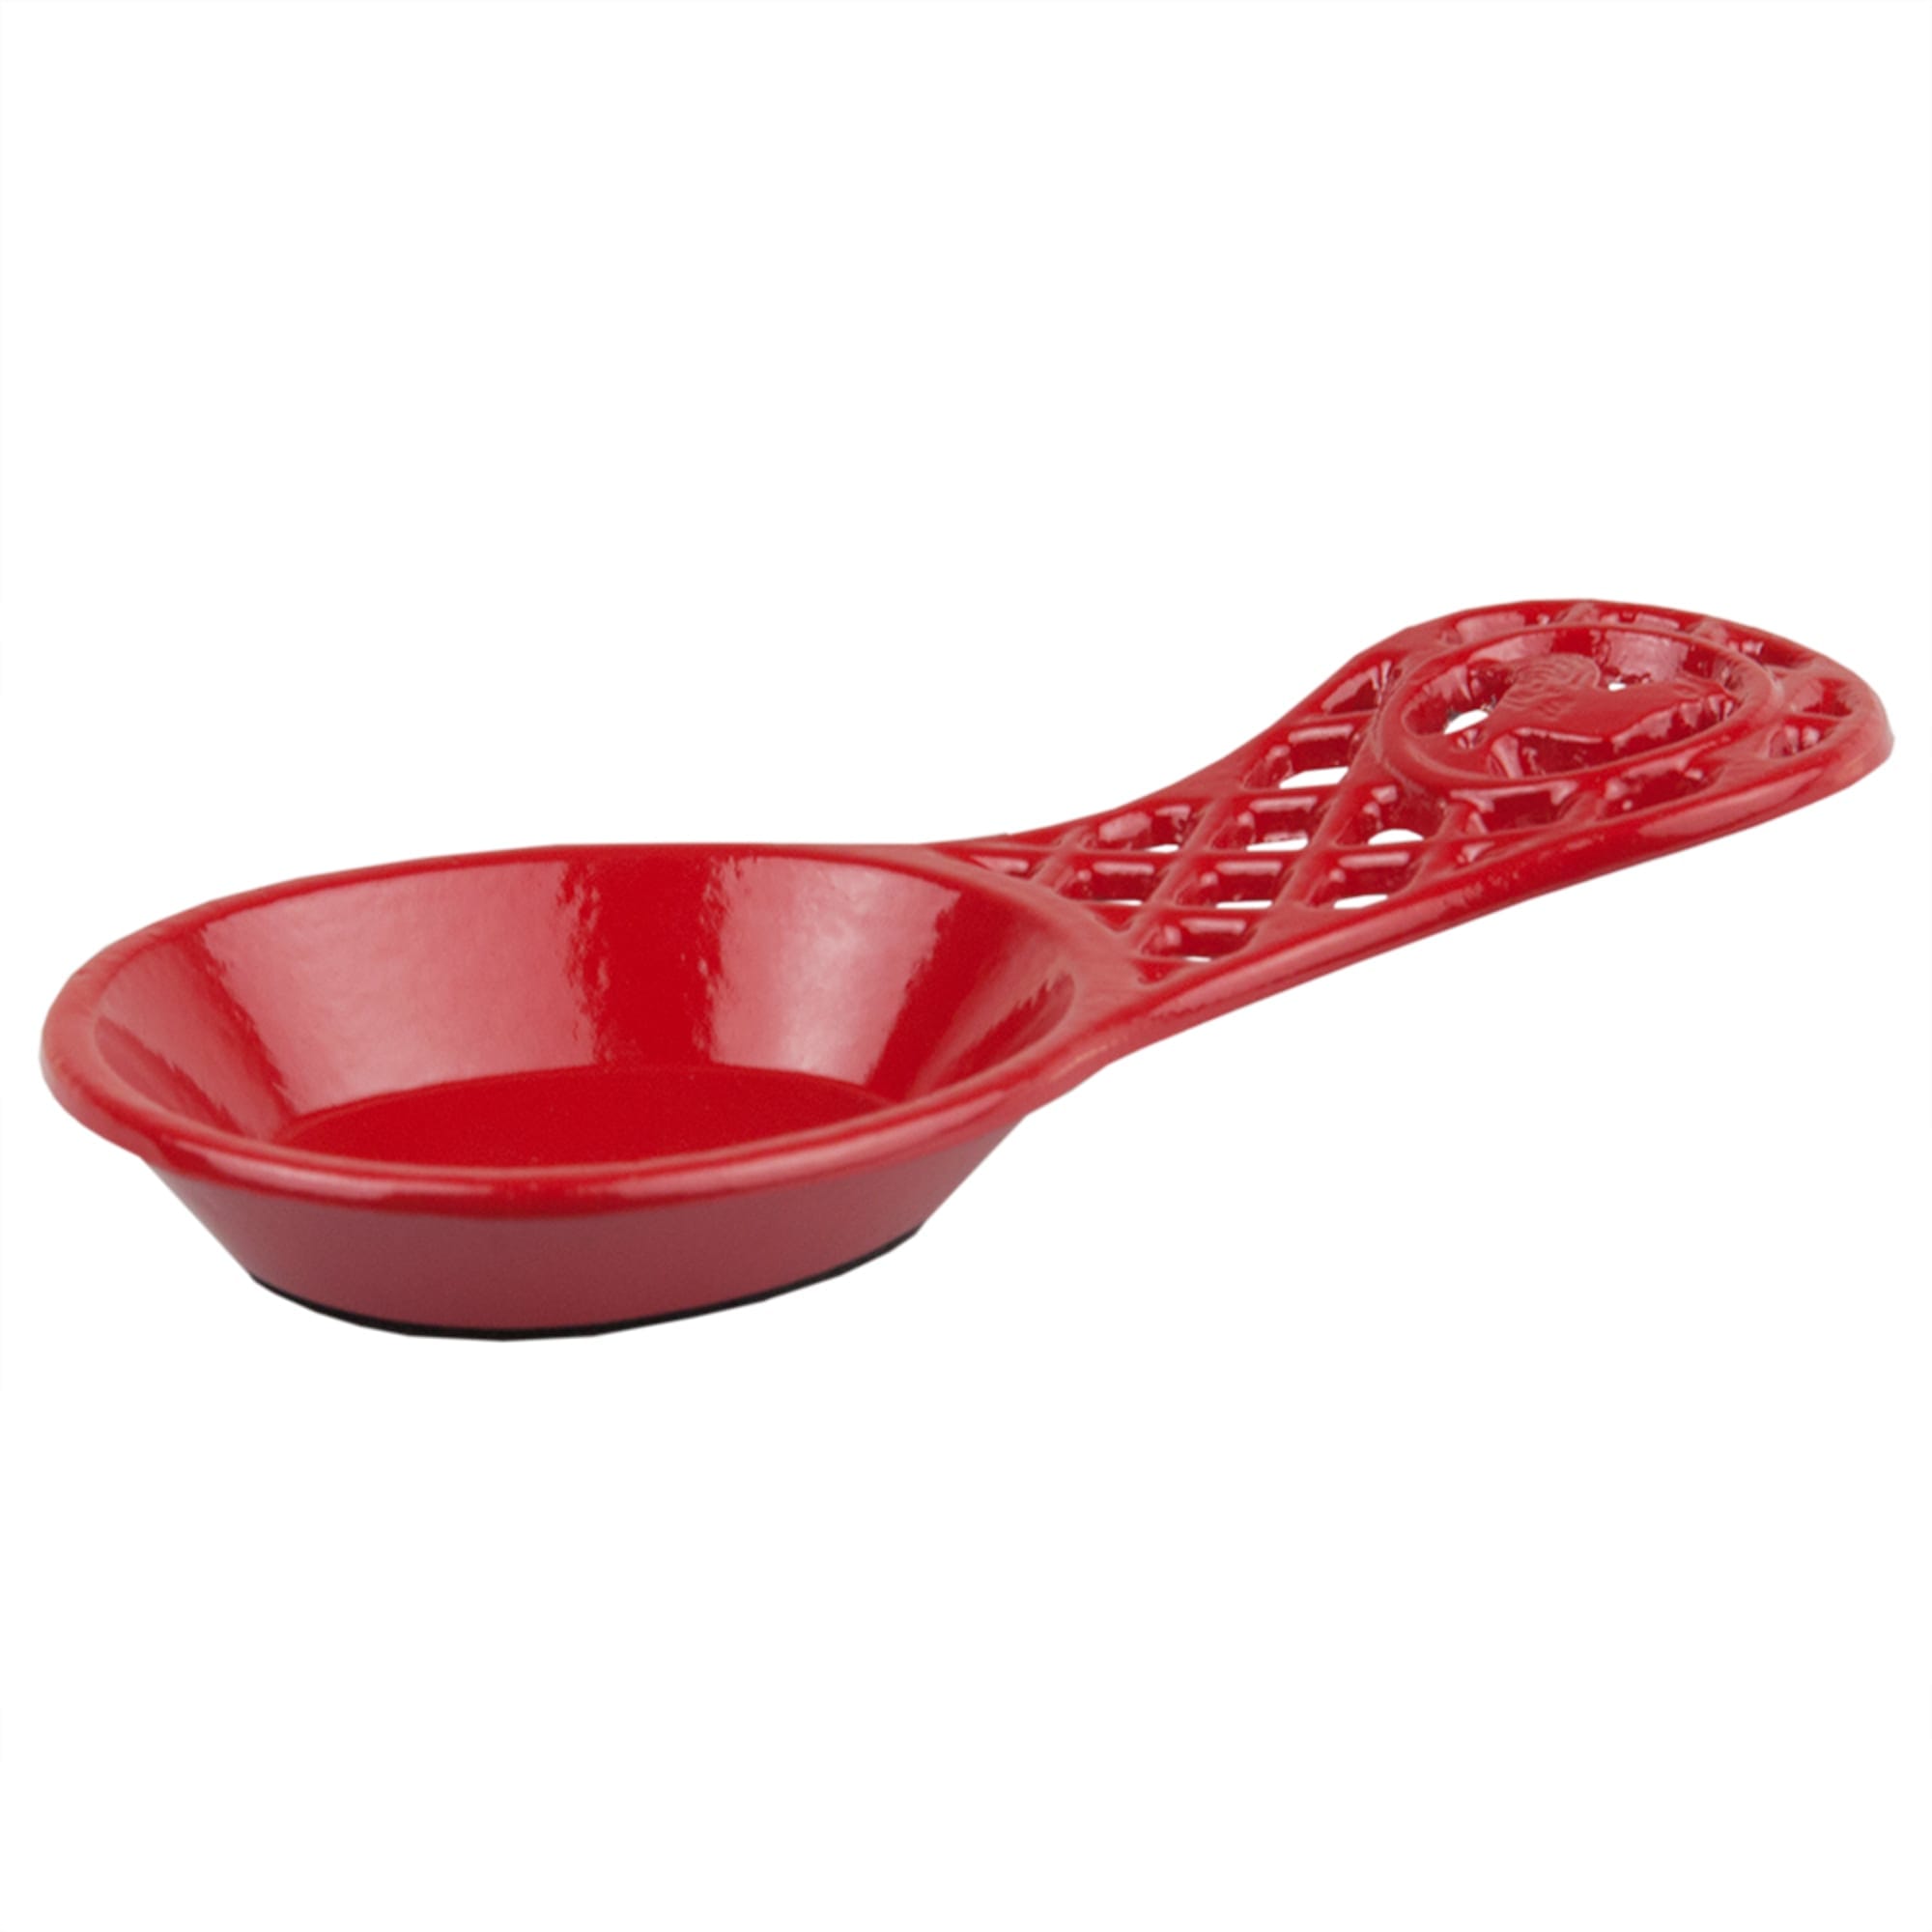 Home Basics Cast Iron Rooster Spoon Rest, Red $4.00 EACH, CASE PACK OF 6